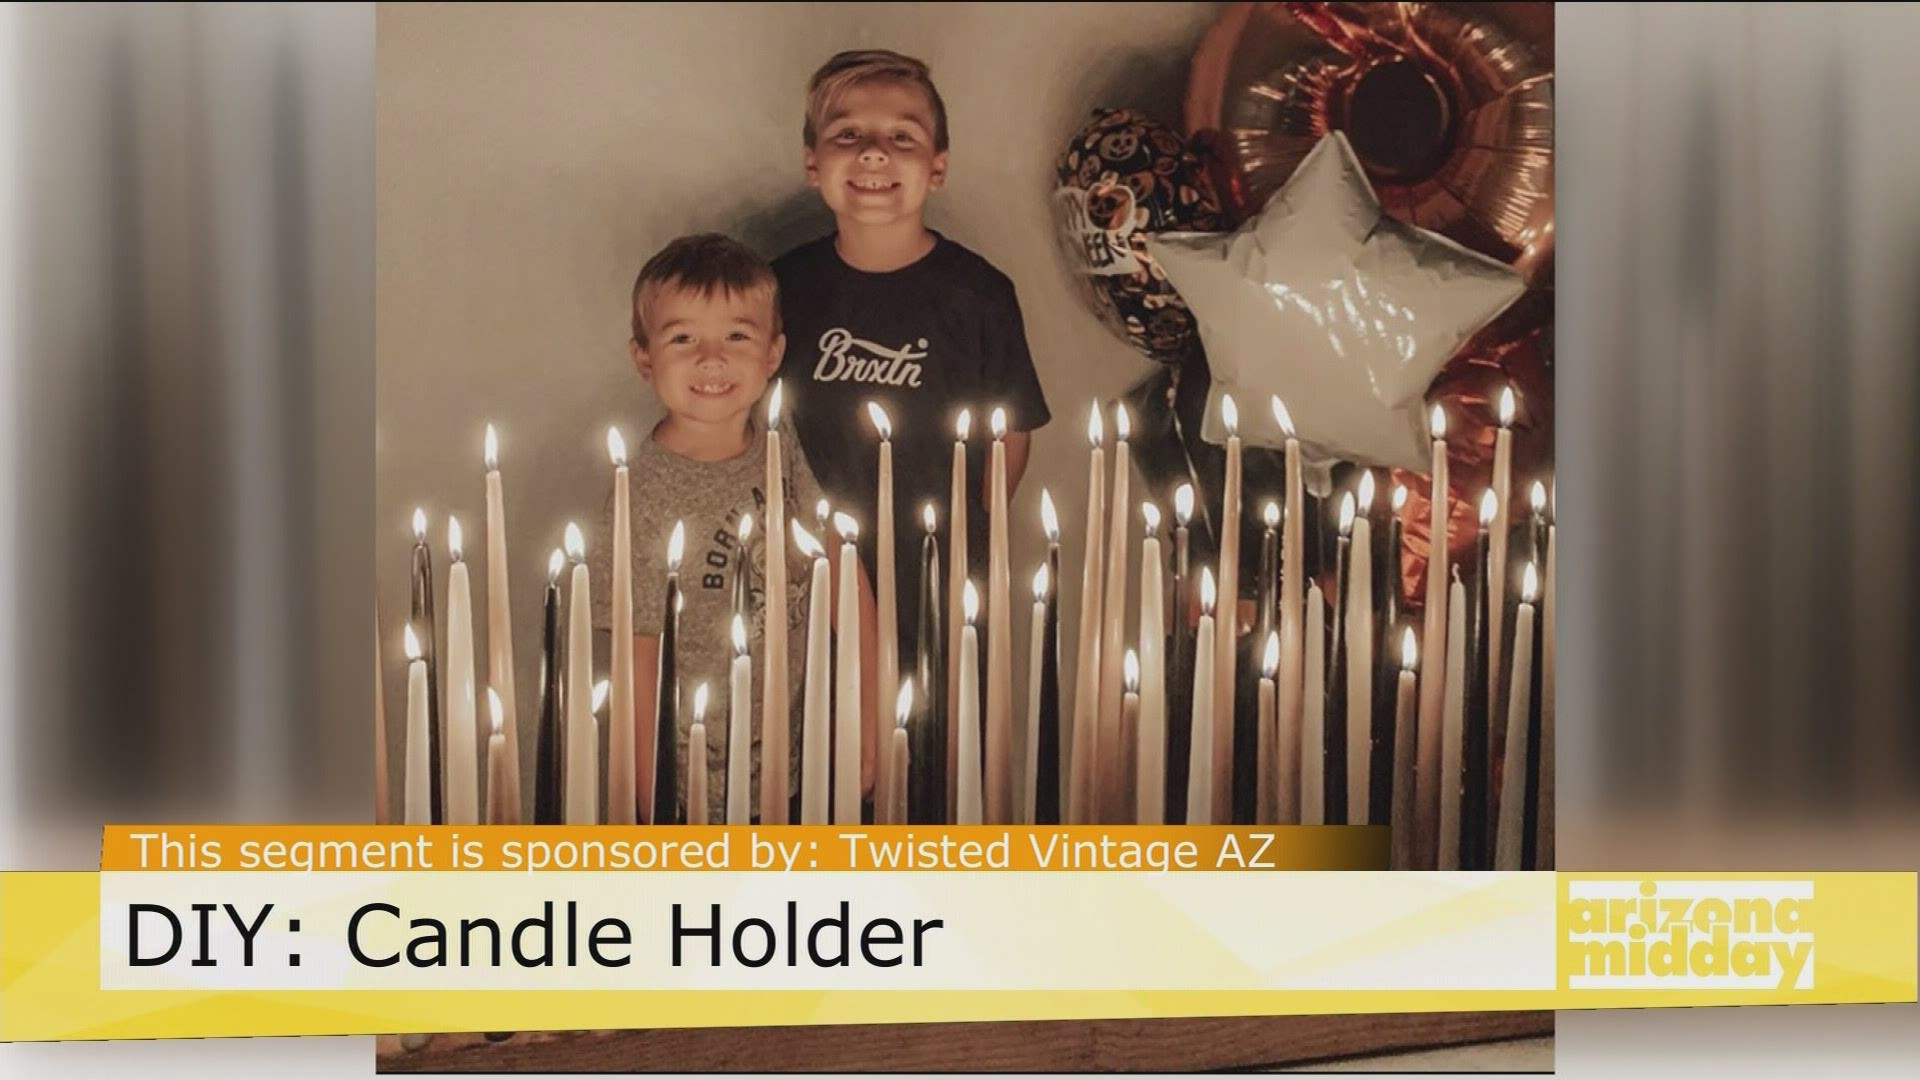 Jessica Ederer with Twisted Vintage AZ shows us how to create this Candler Holder Centerpiece